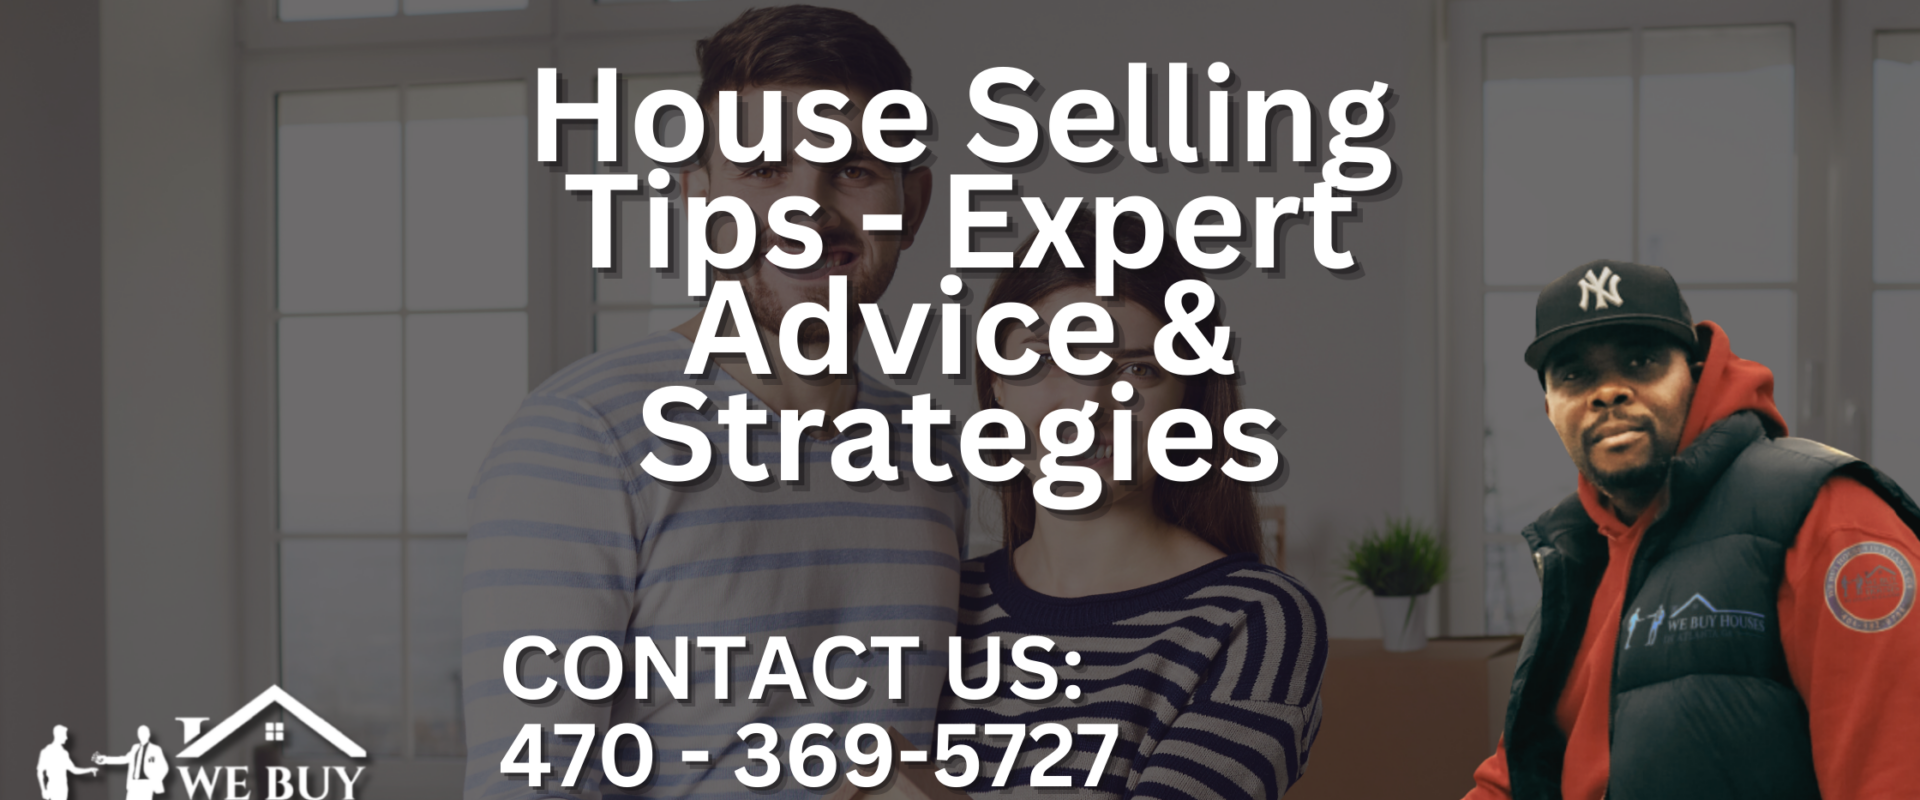 House Selling Tips - Expert Advice & Strategies